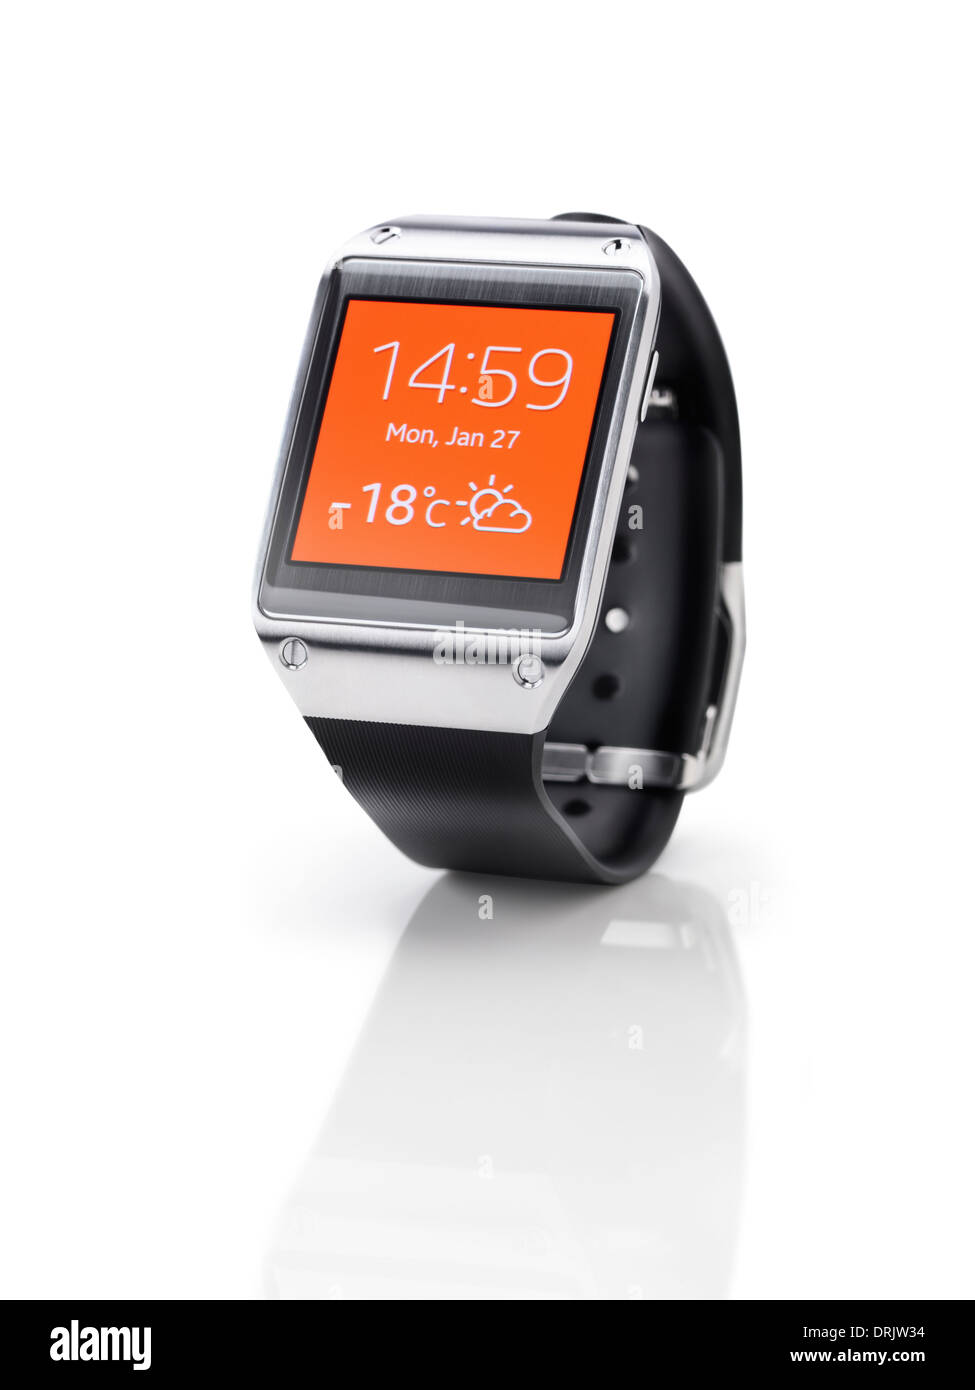 Samsung Galaxy Gear smartwatch with orange display closeup. Isolated watch on white background with clipping path. Stock Photo